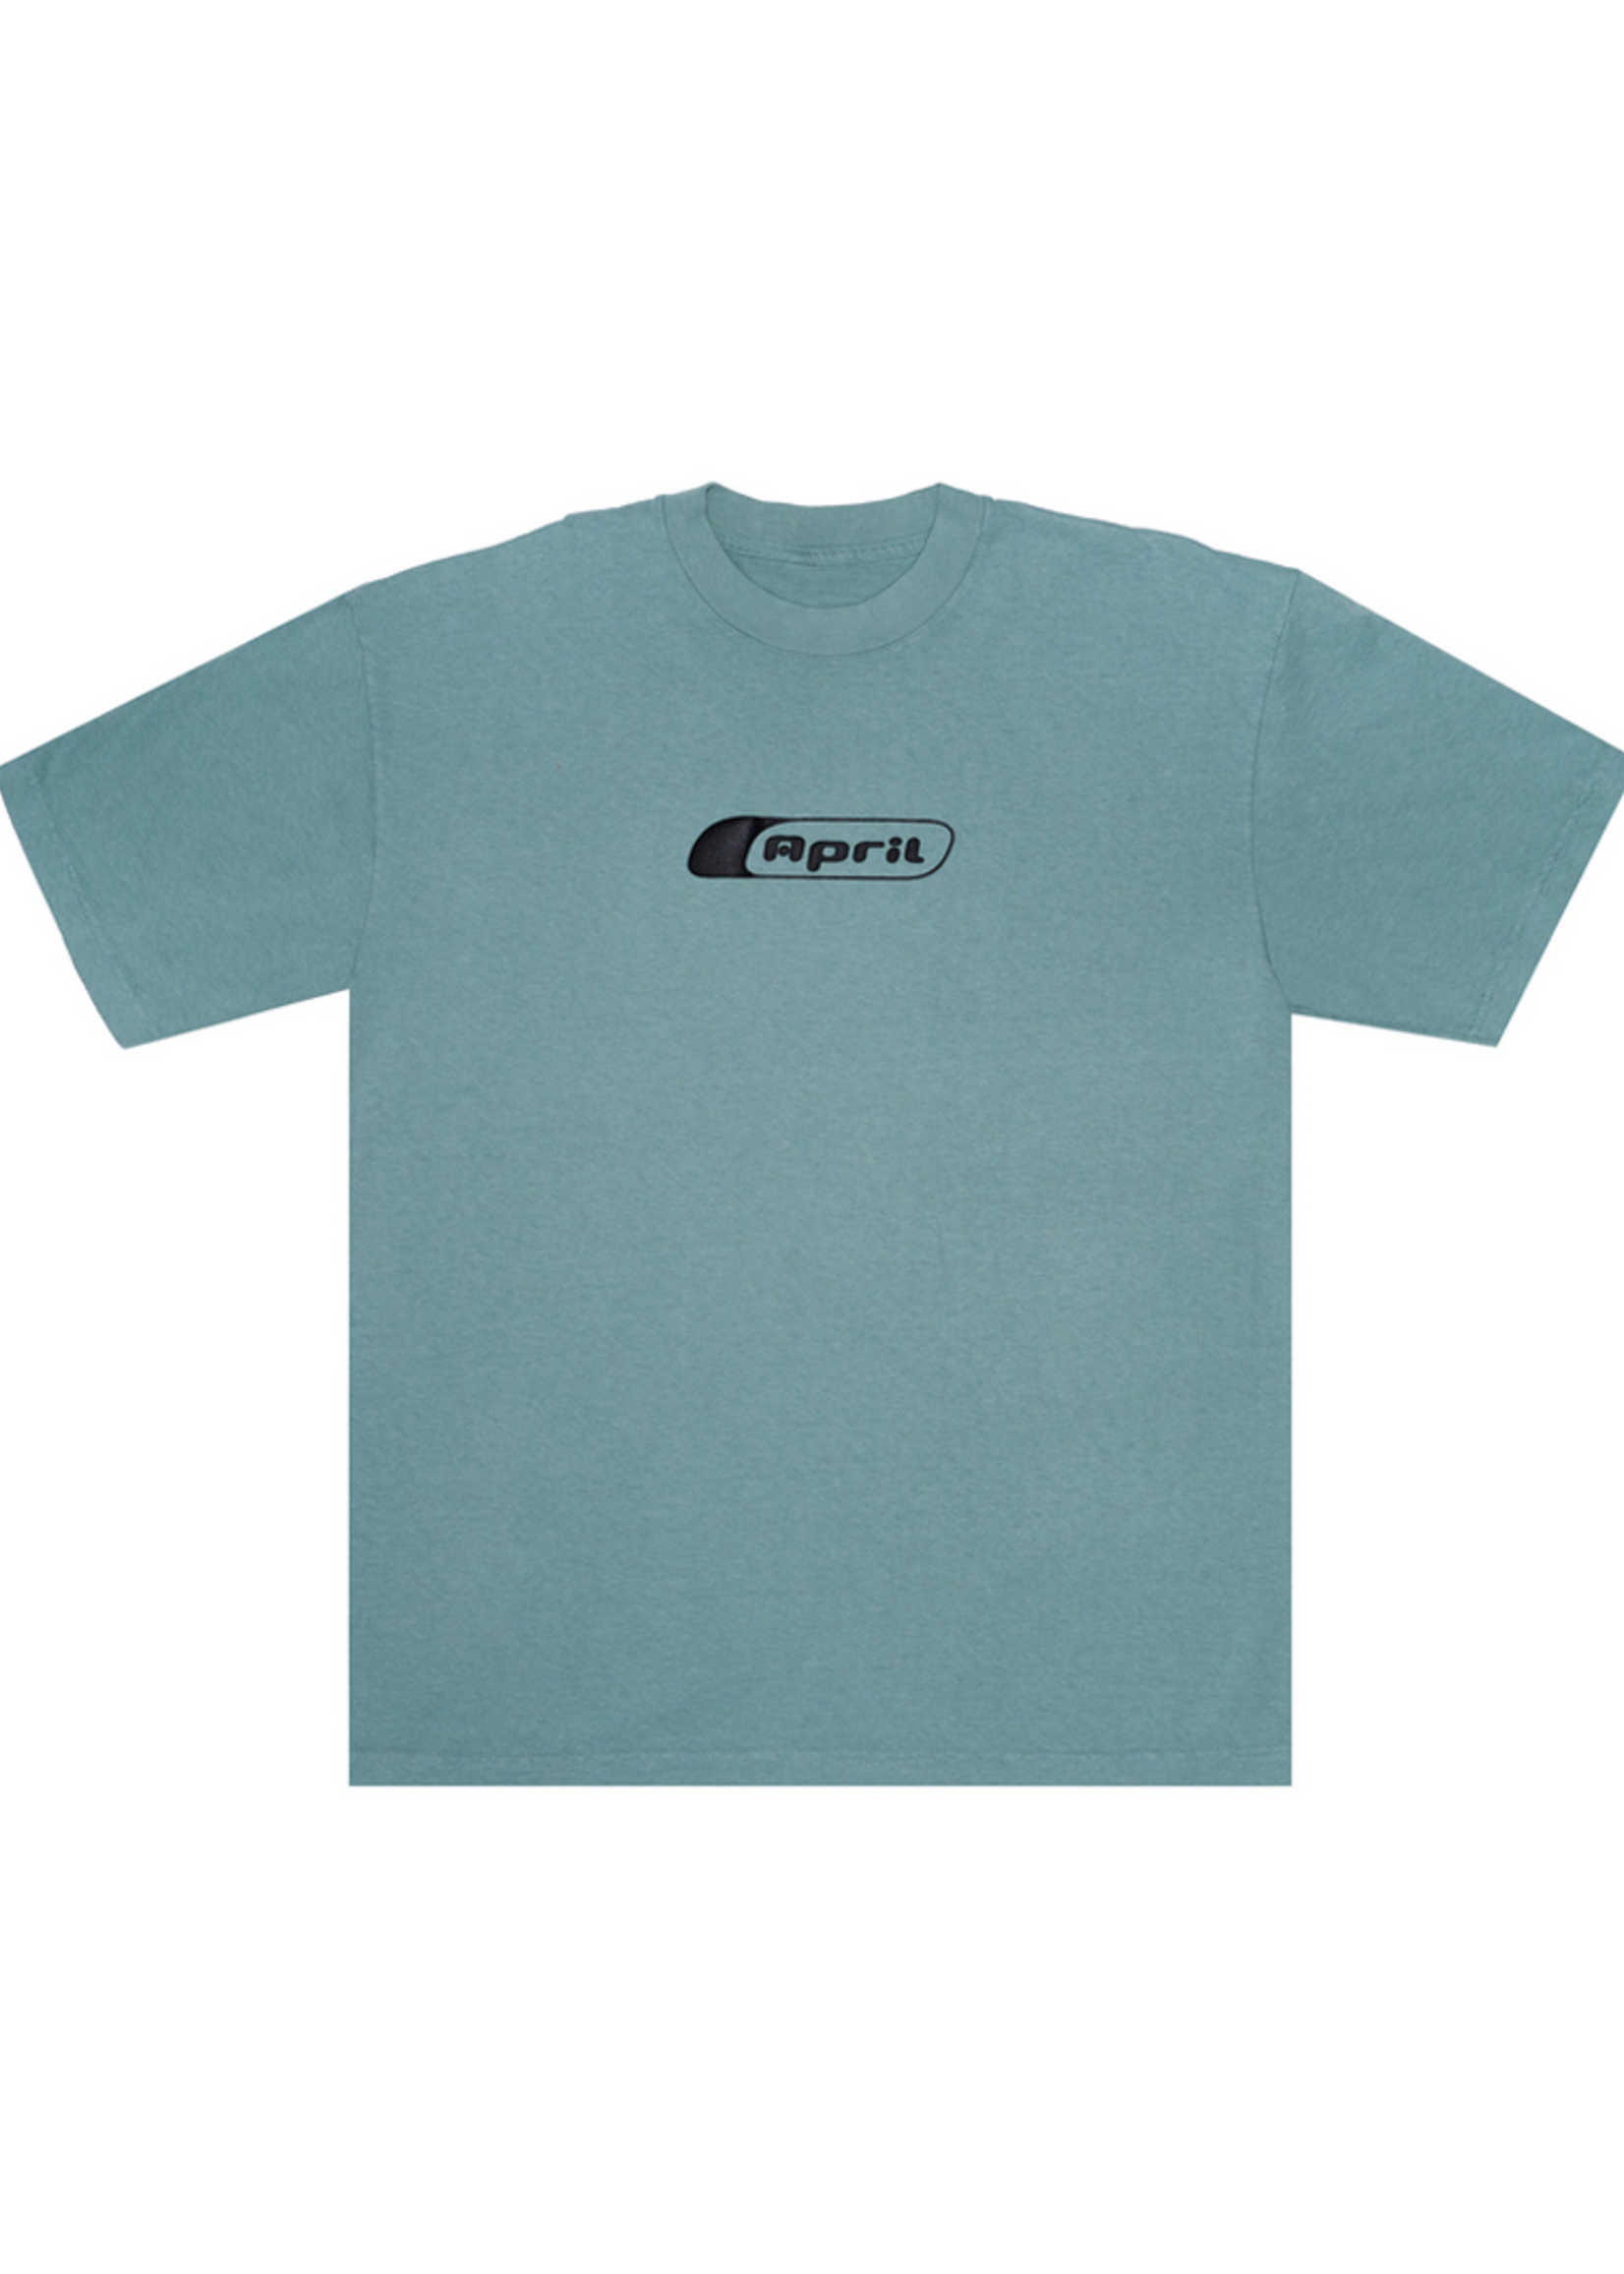 APRIL SKATEBOARDS PUFFY TEE